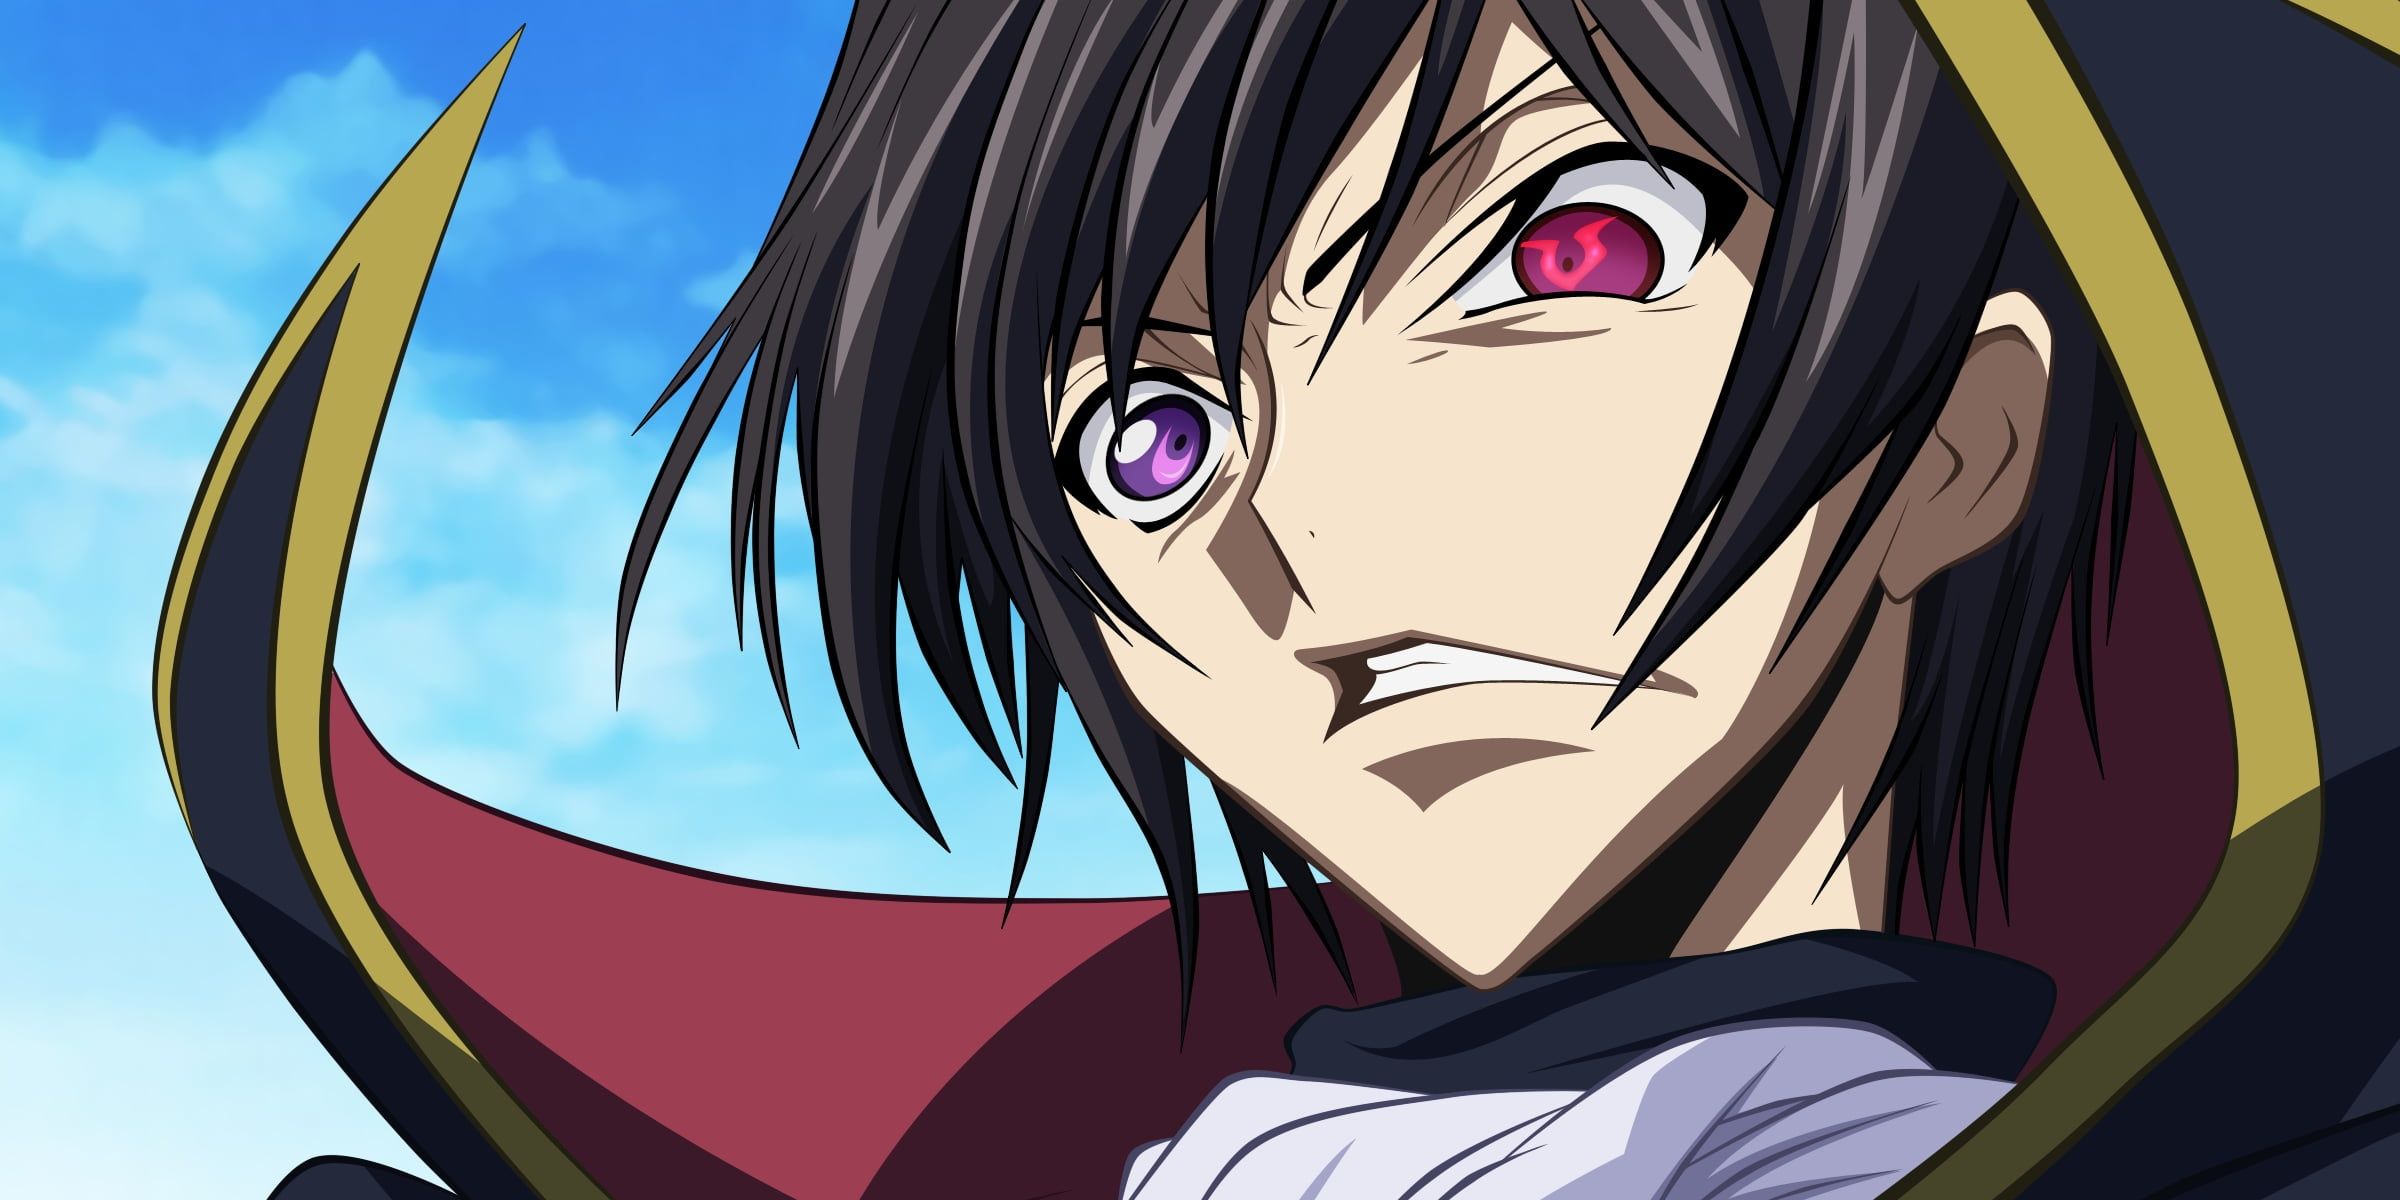 Lelouch from Code Geass is Pictured